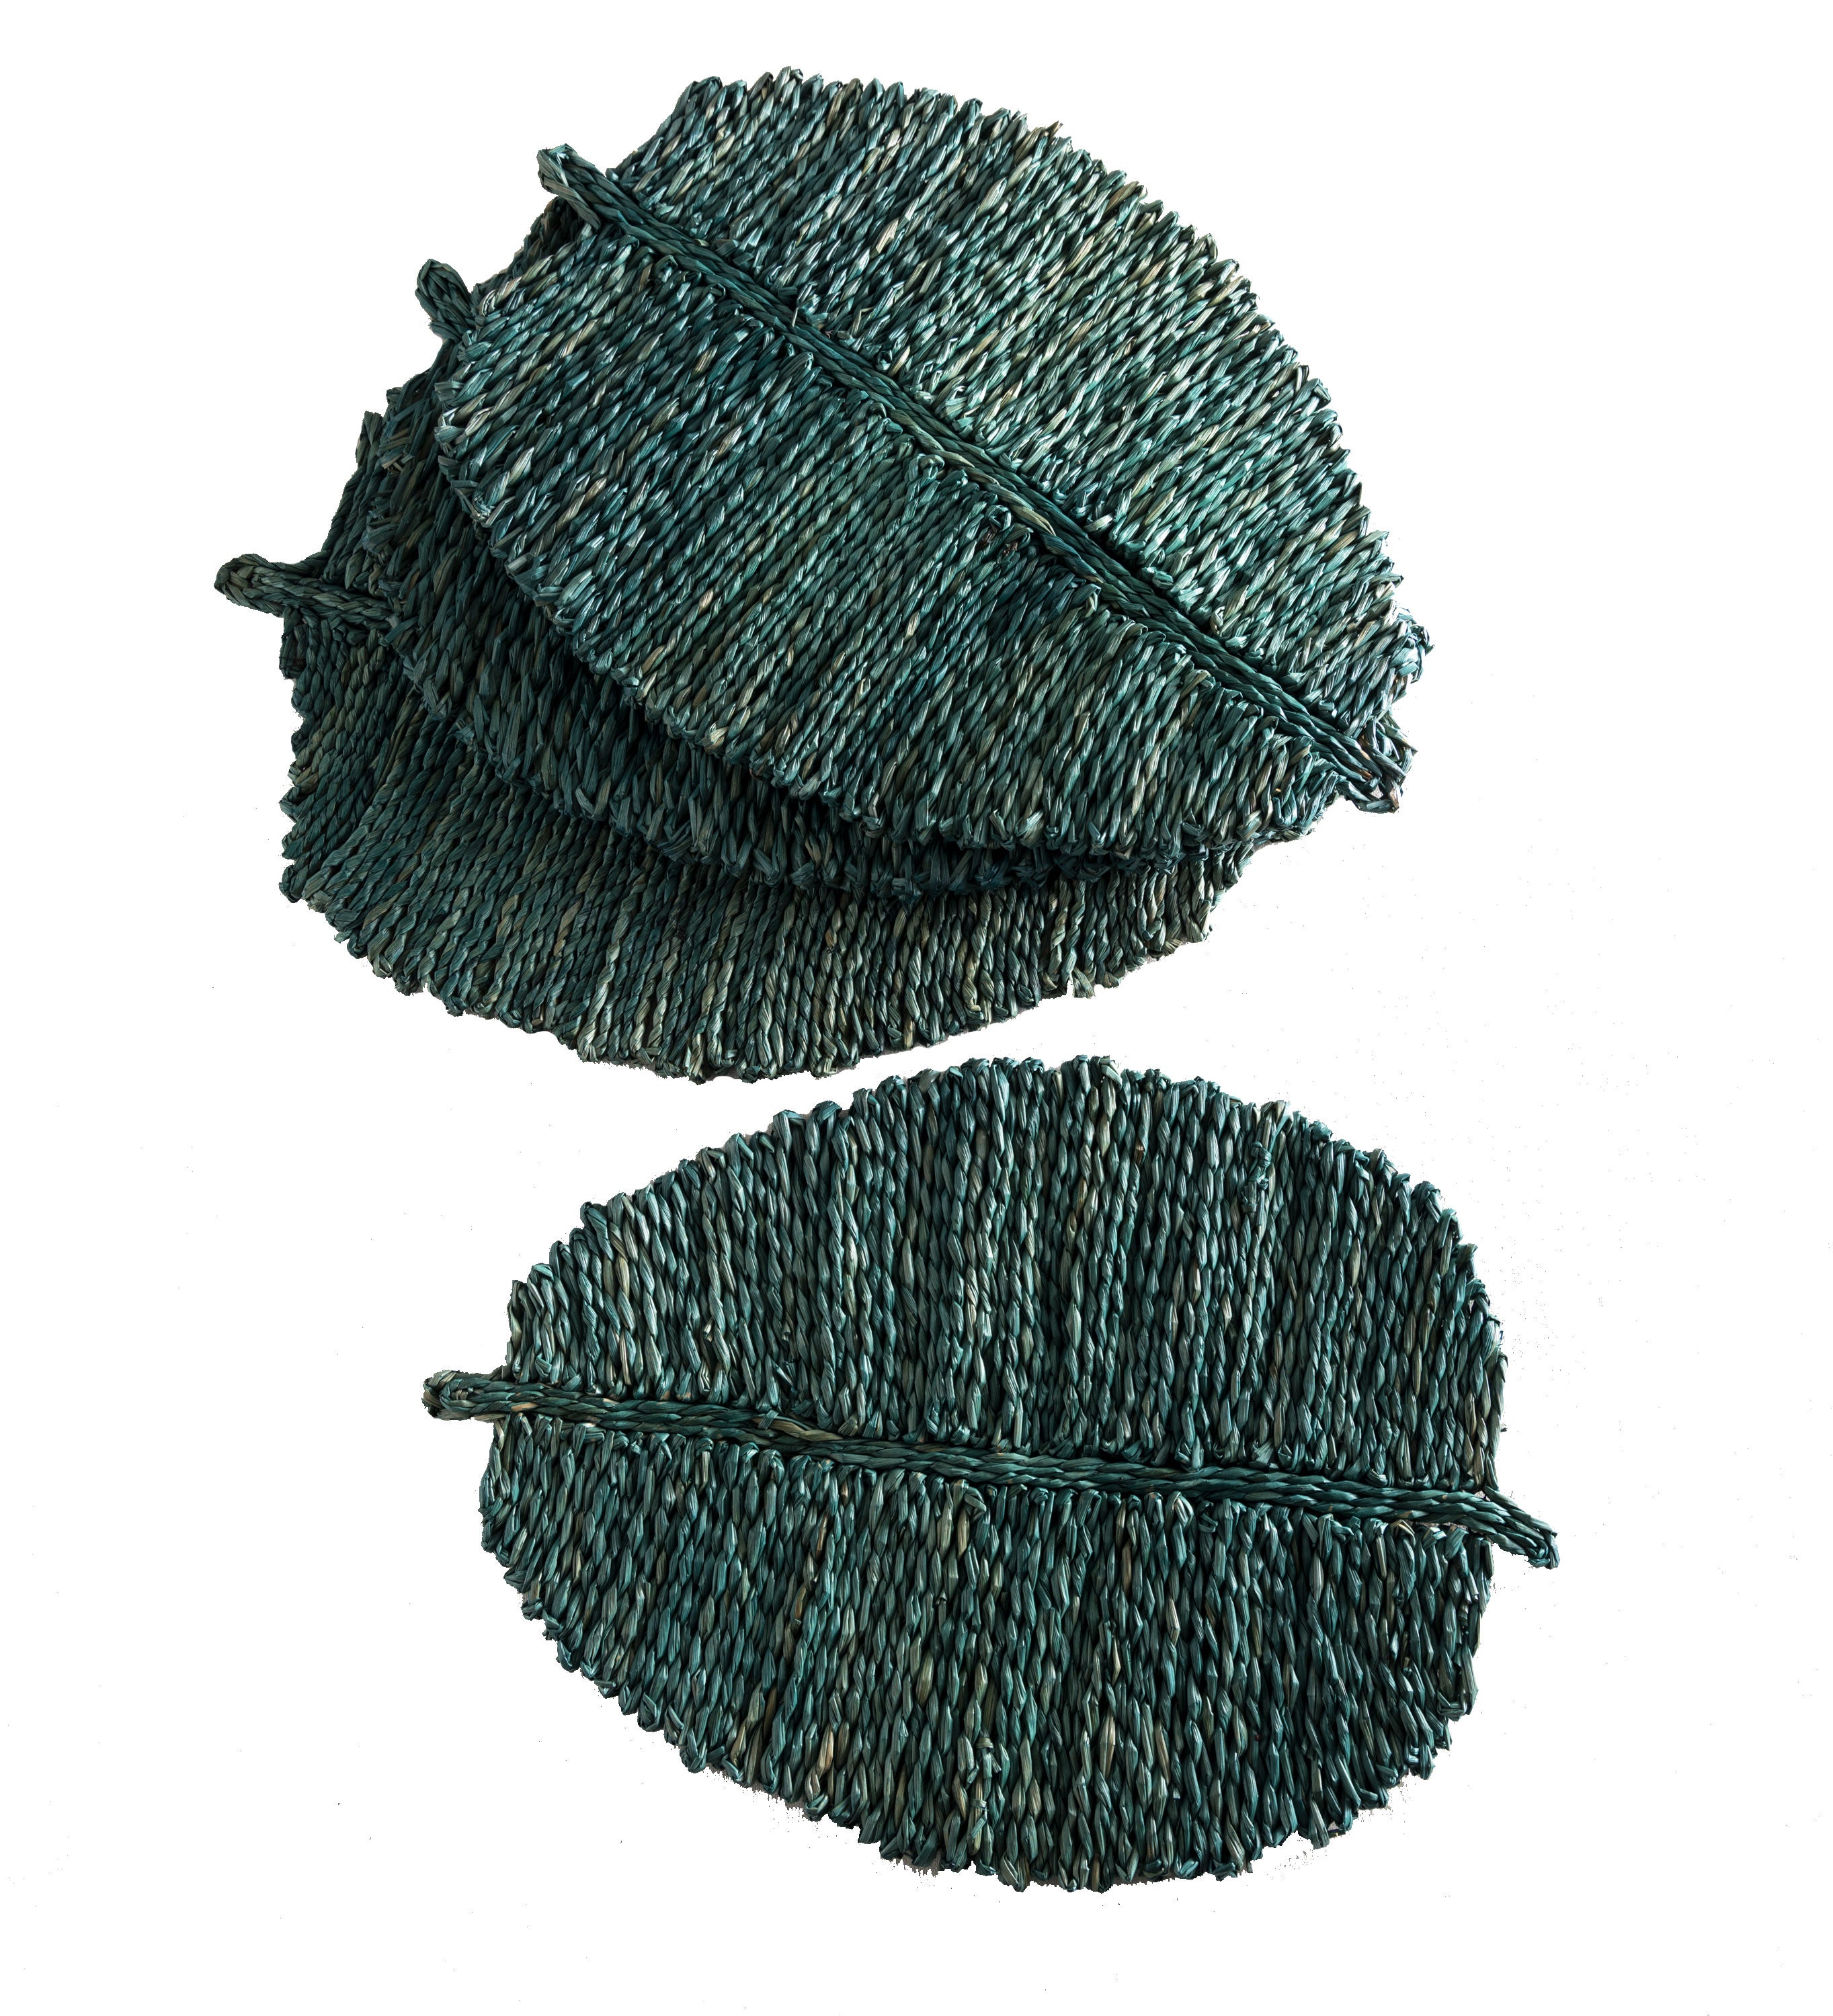 Hand-Woven Leaf Shaped Seagrass Placemats, Set of 4 swatch image